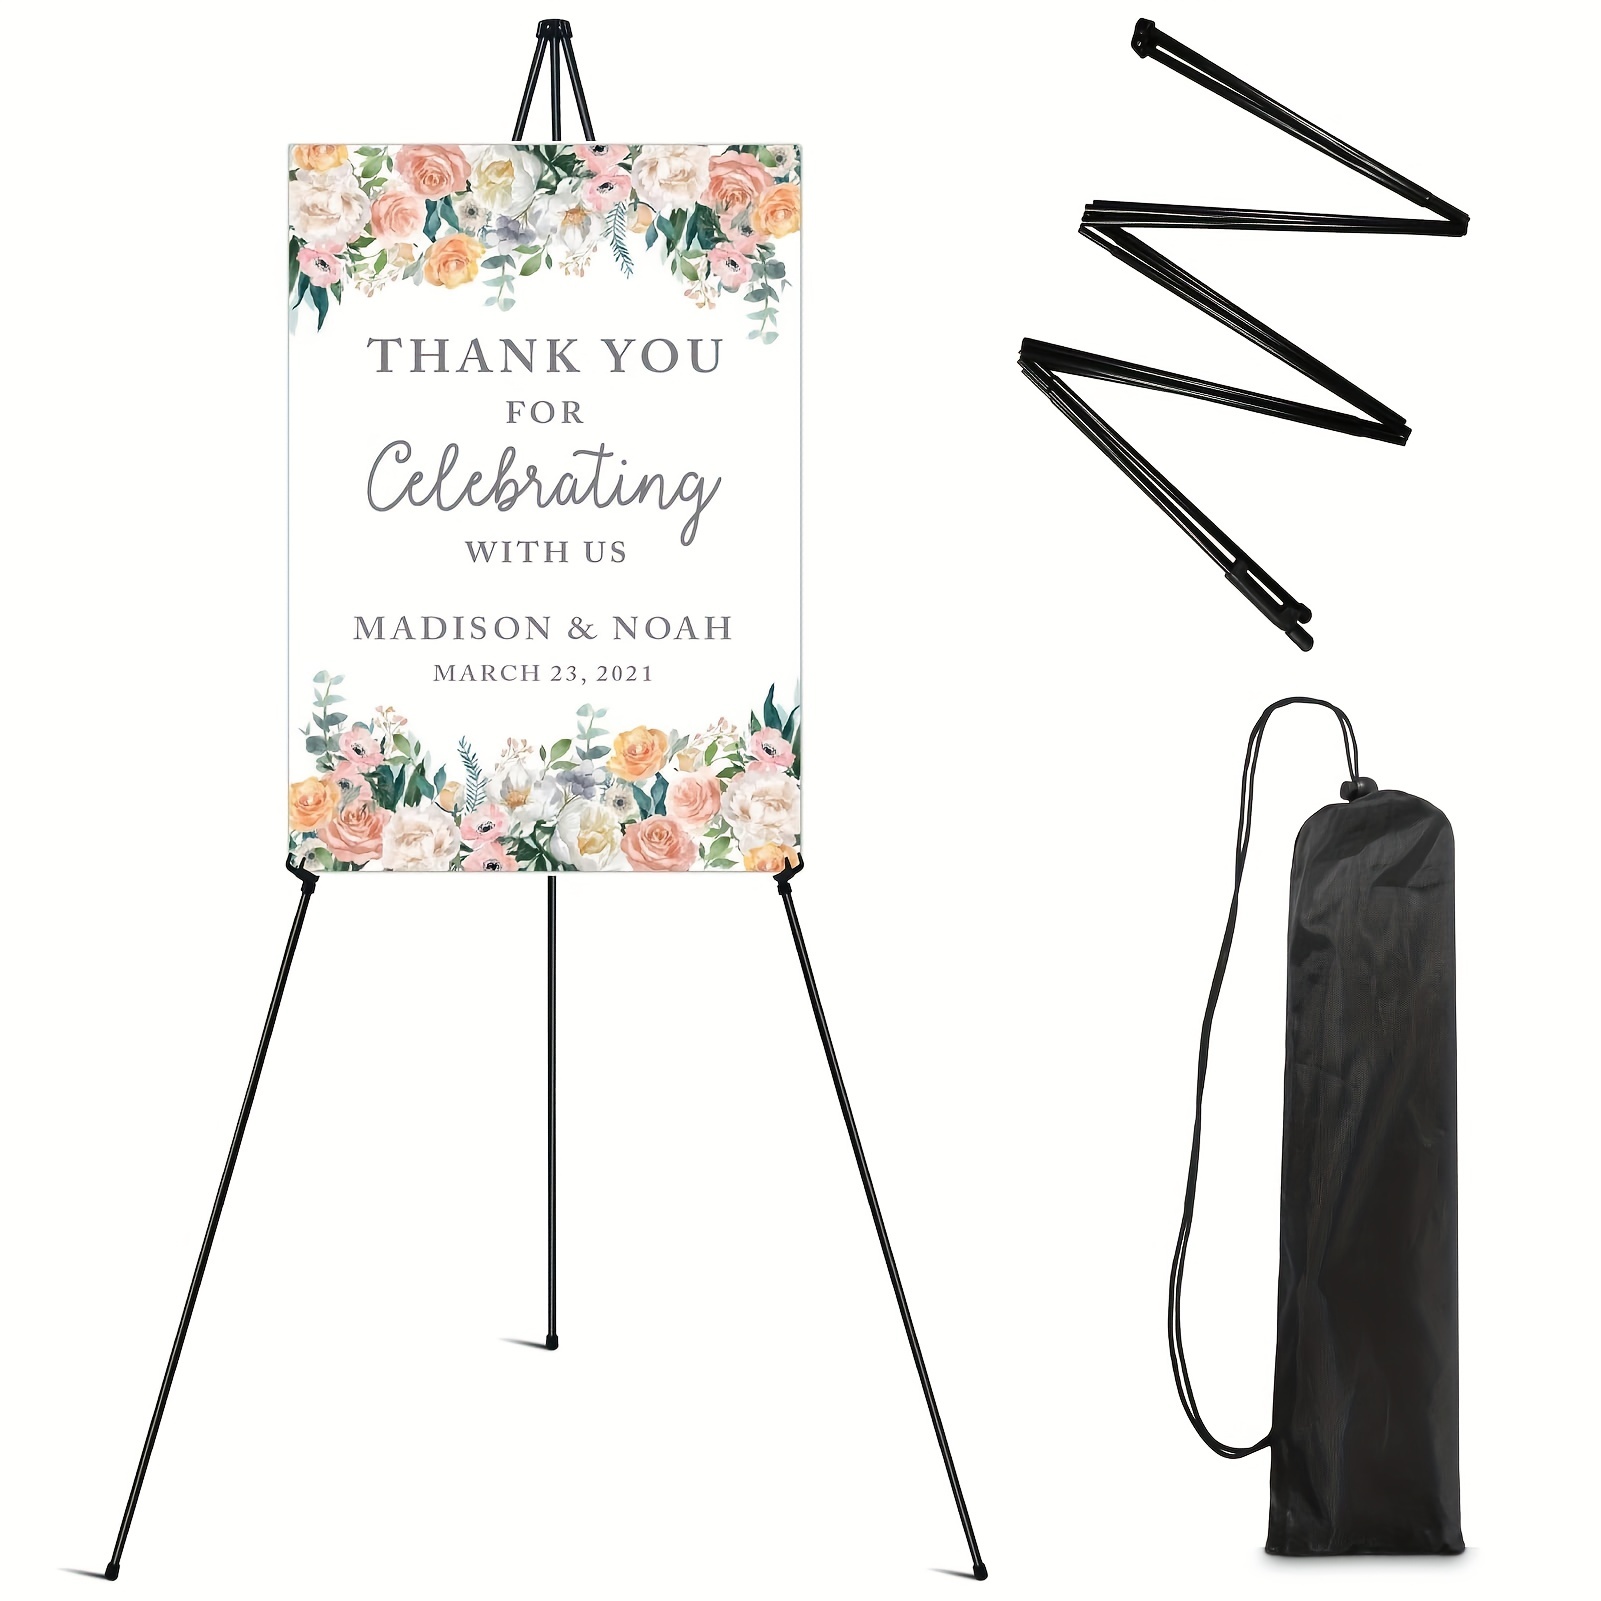 Easel Stand for Display Welcome Sign - 63 Inches Tall Collapsable Portable with Tripod Base for Painting Canvas Wedding Sign - Black